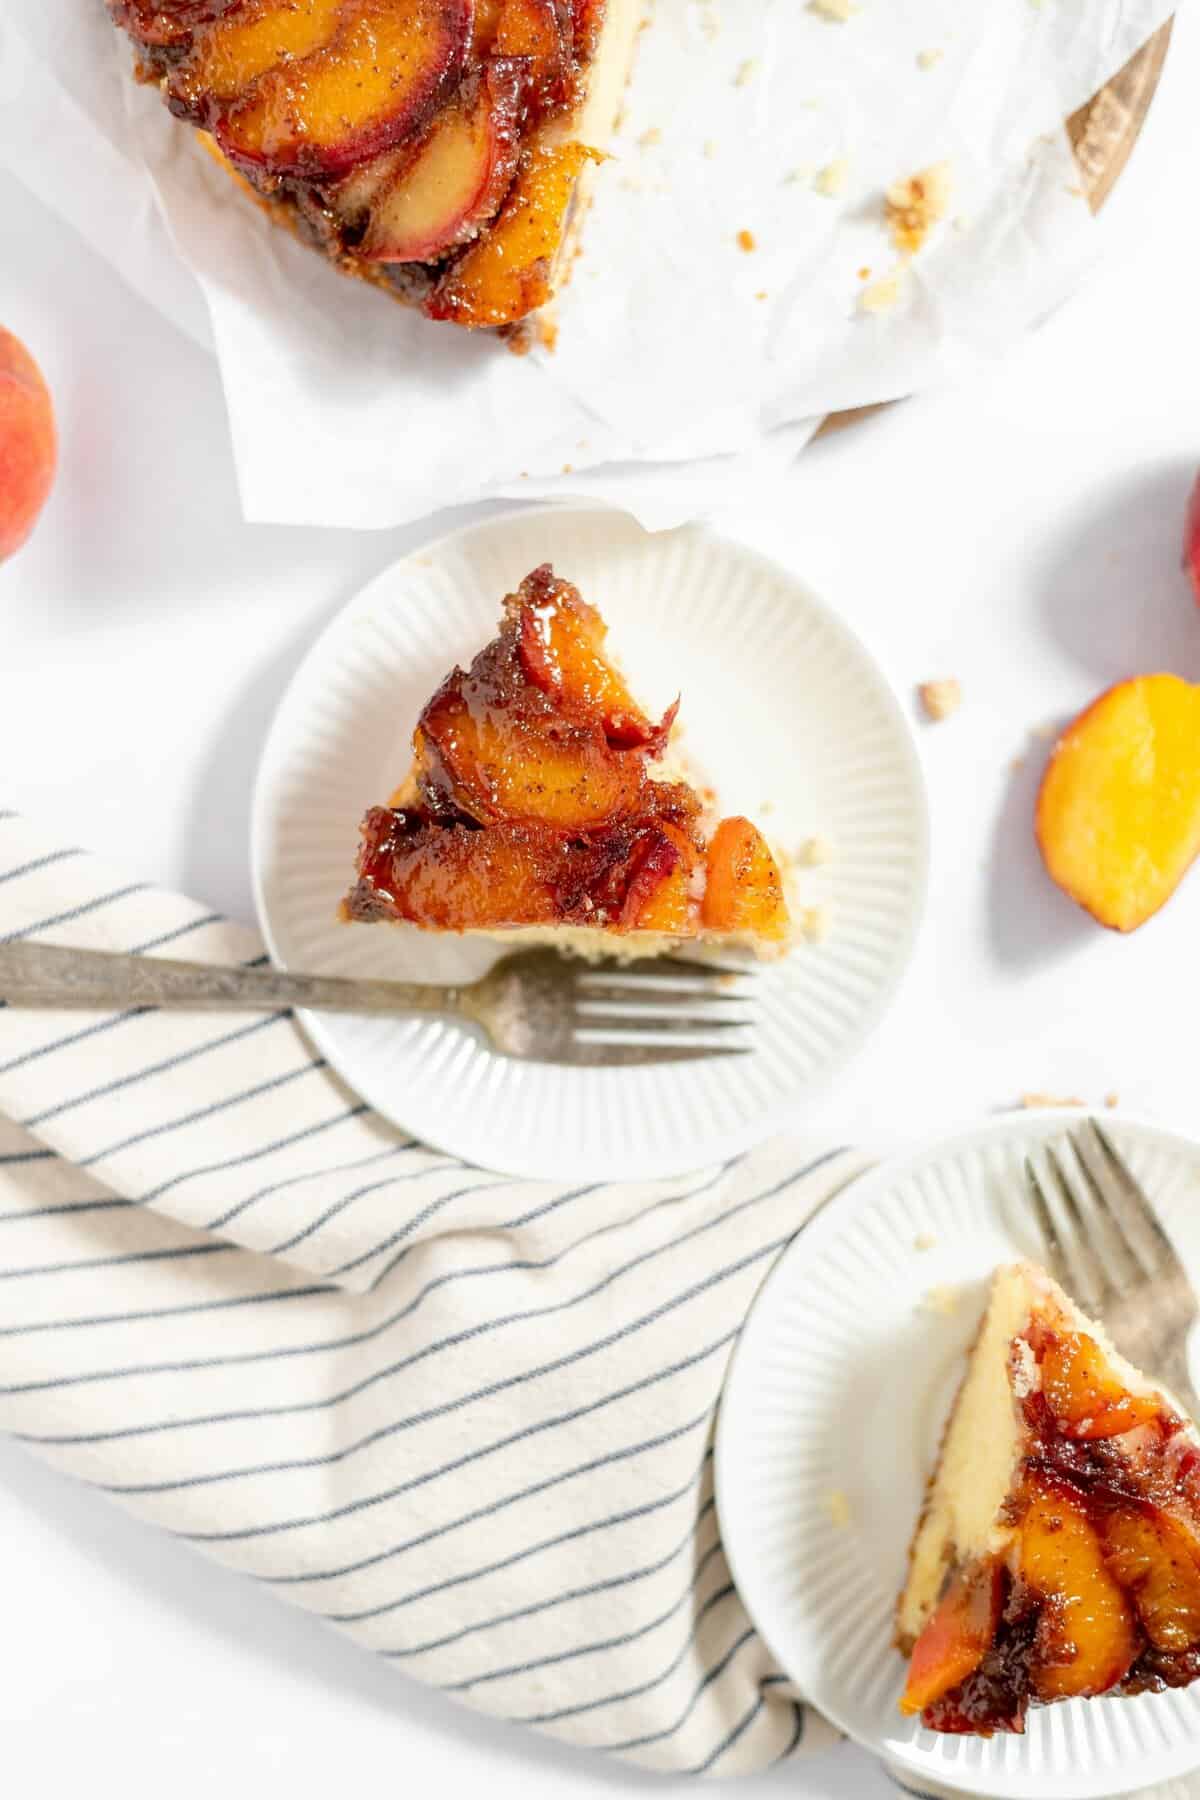 two slices of peach upside down cake on white plates with forks.